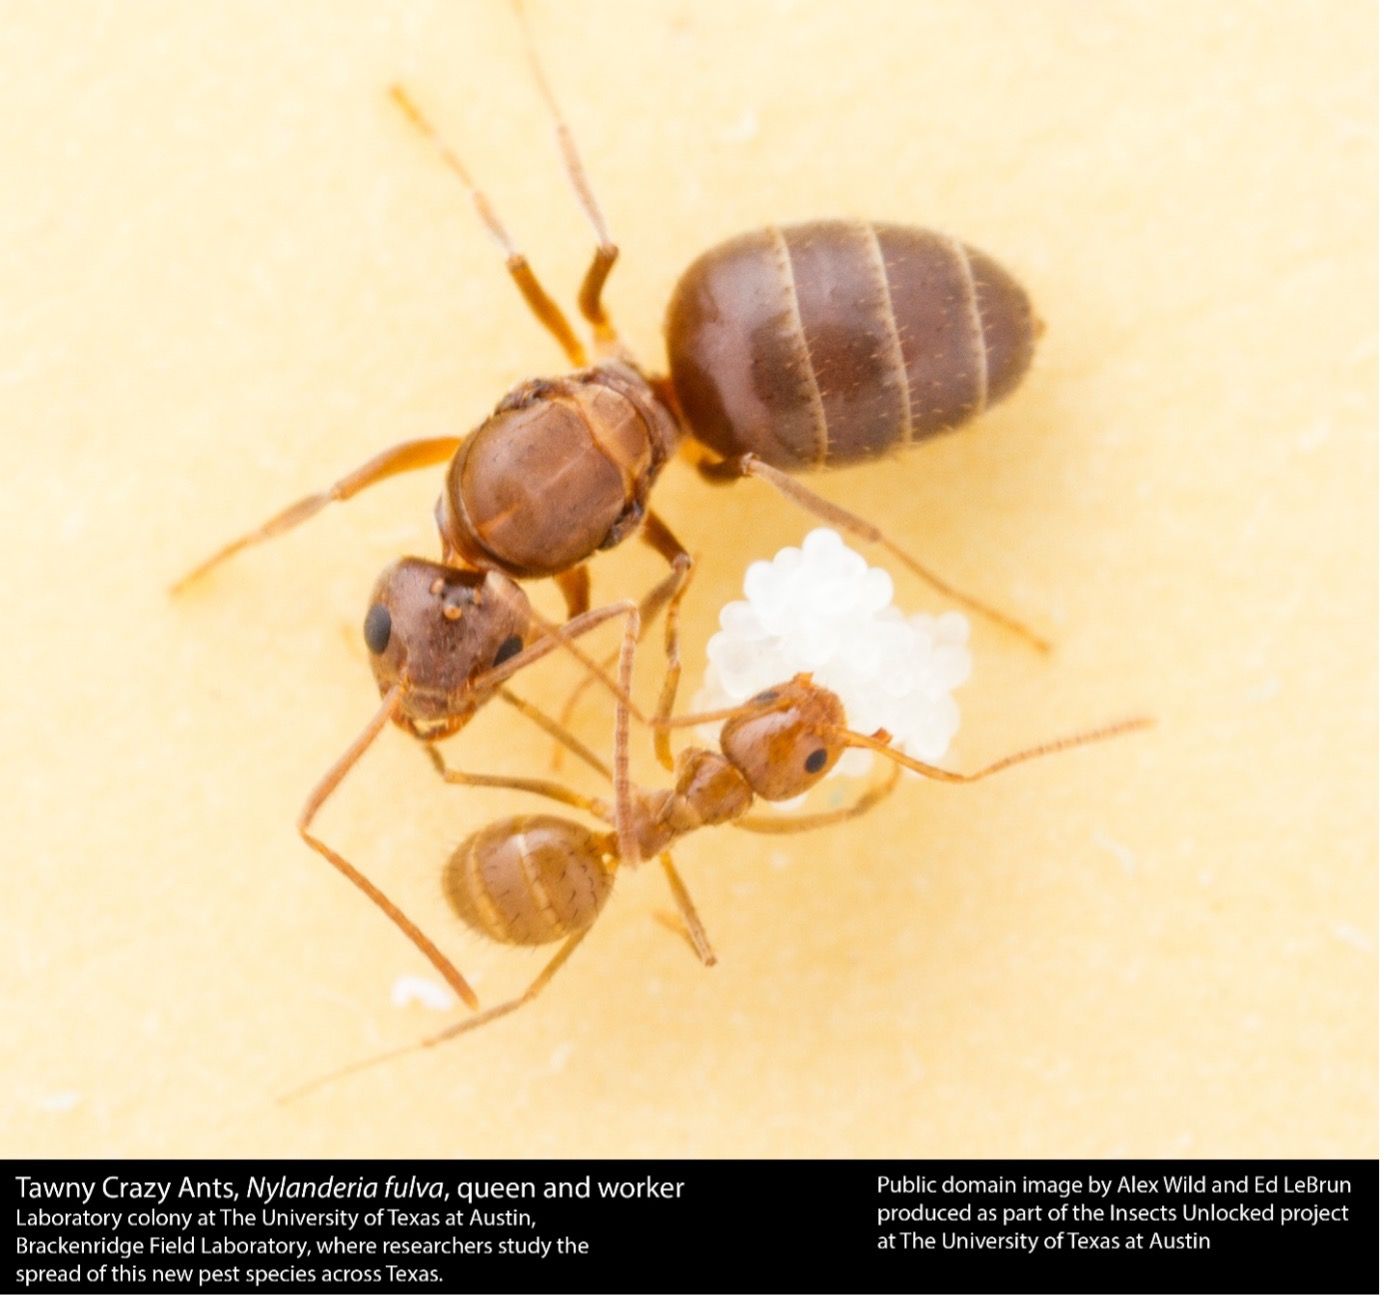 Tawny crazy ant queen and worker with egg cluster.